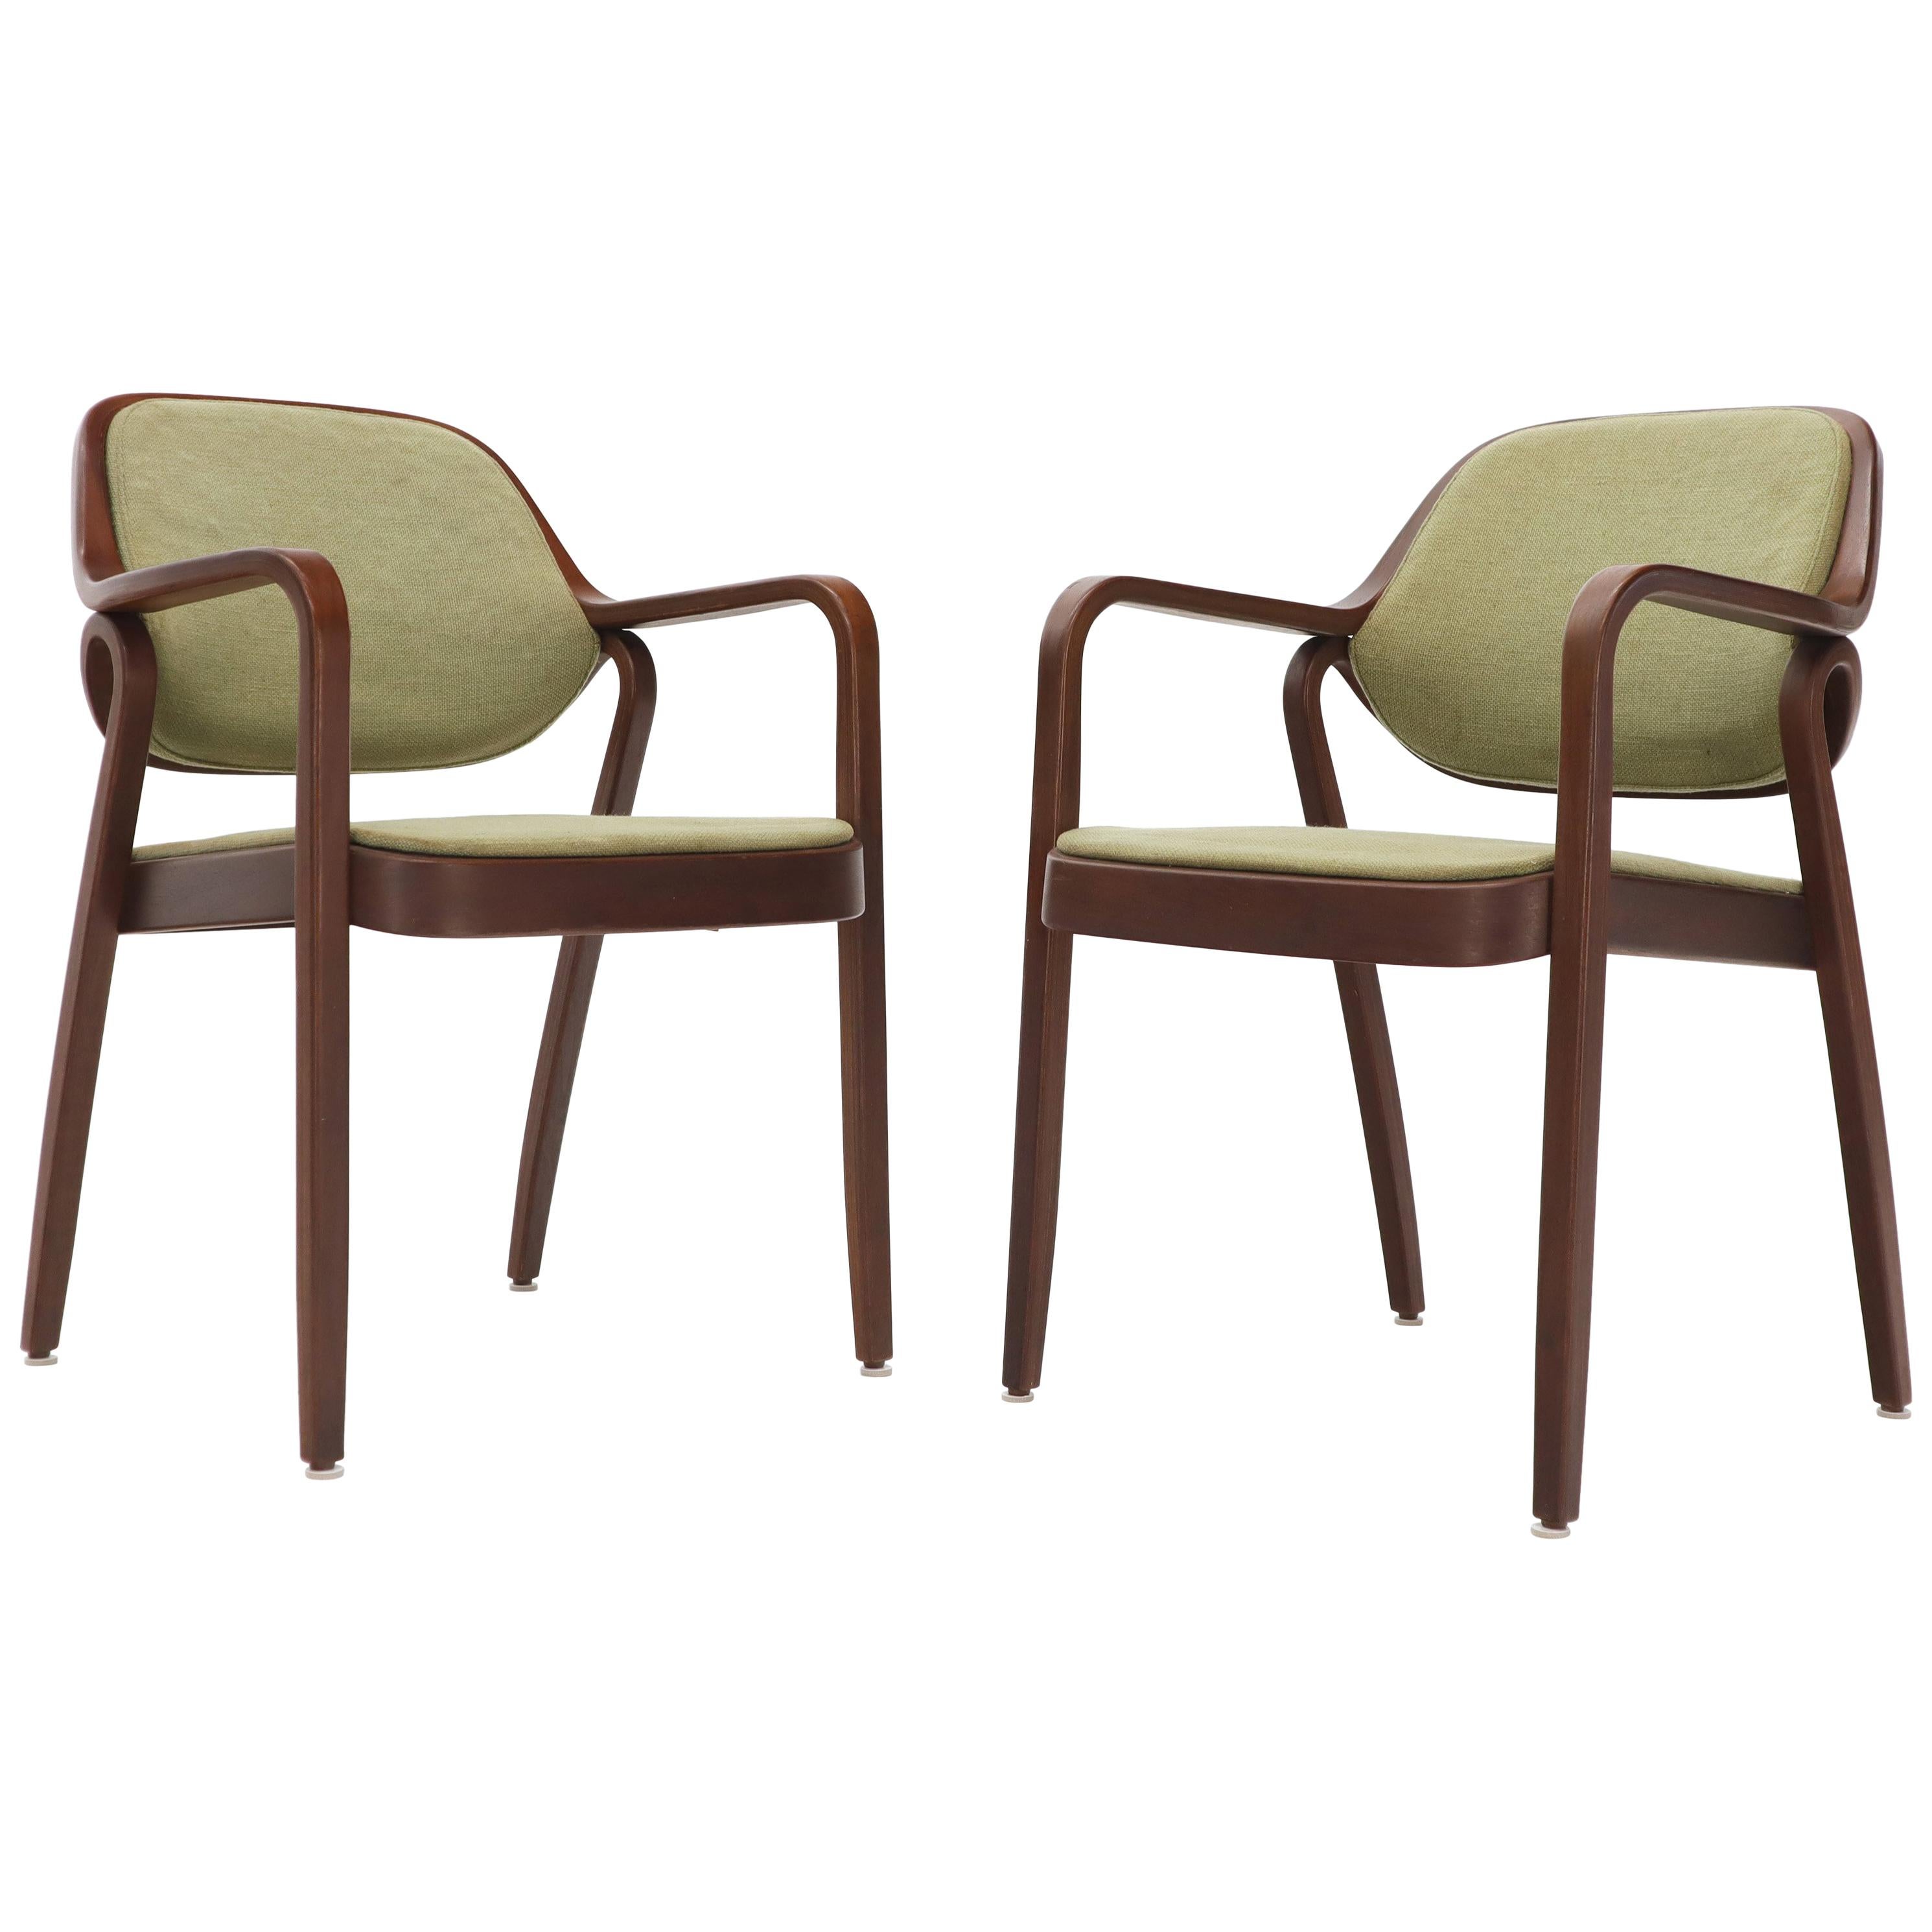 Pair of Bent Walnut Wood Dining Chairs by Knoll